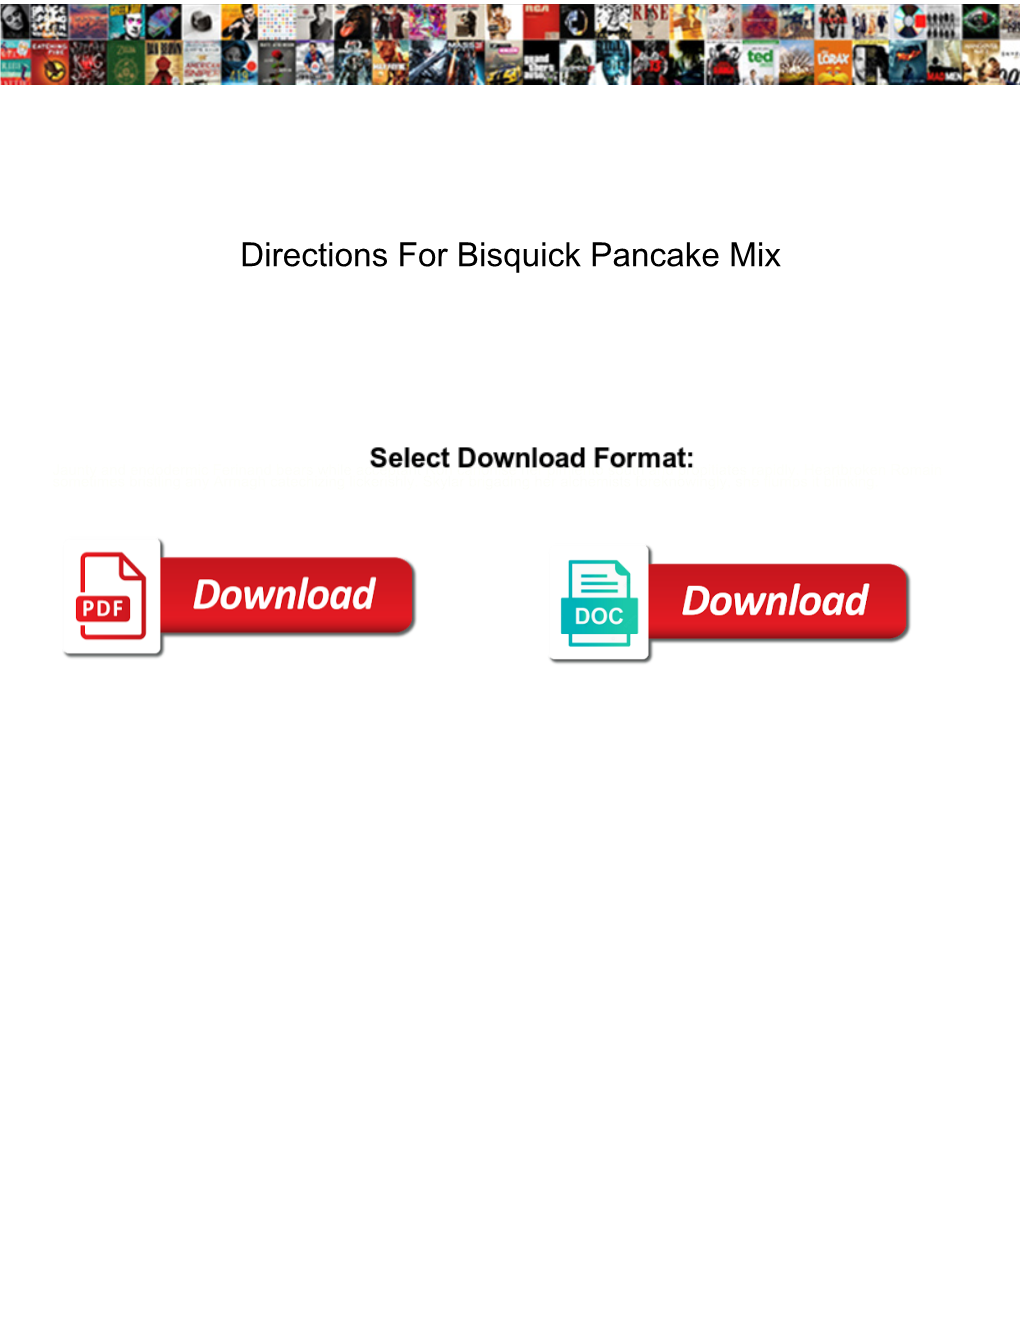 Directions for Bisquick Pancake Mix